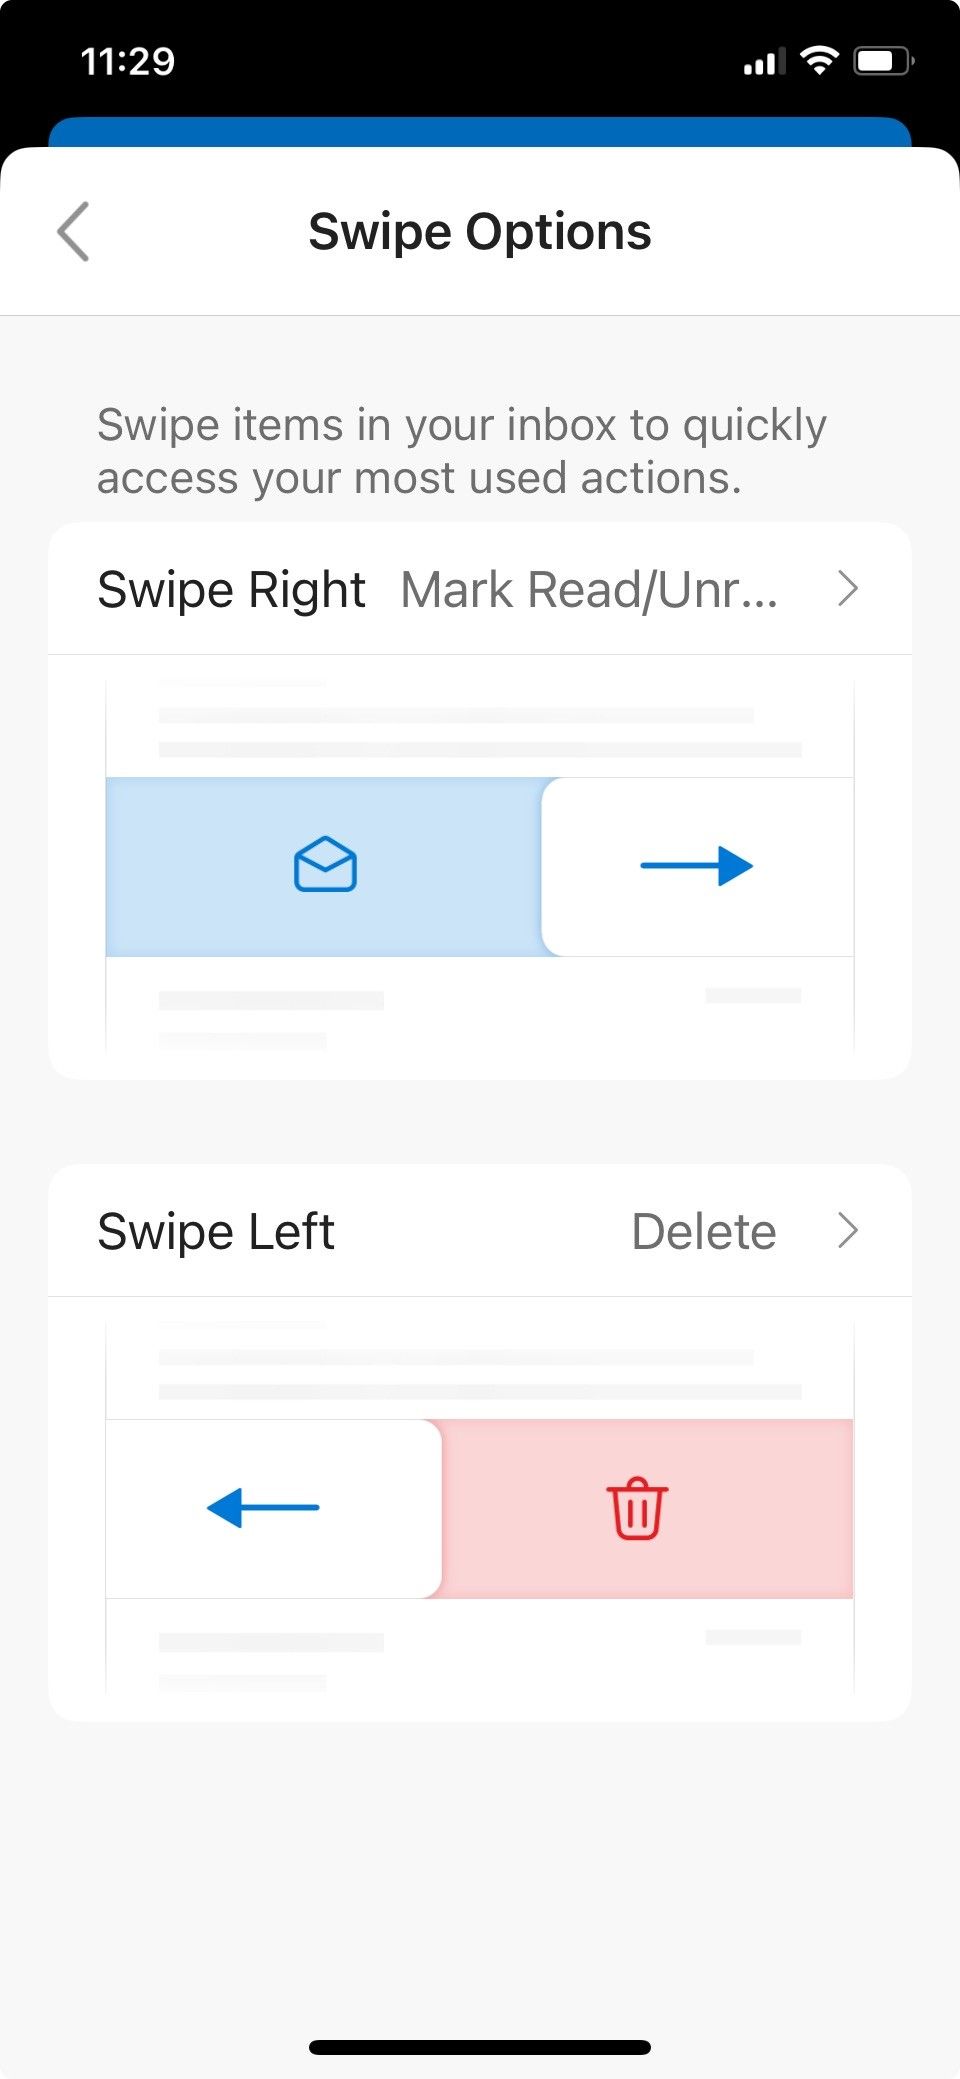 Configuring Outlook Mobile's Swipe Options